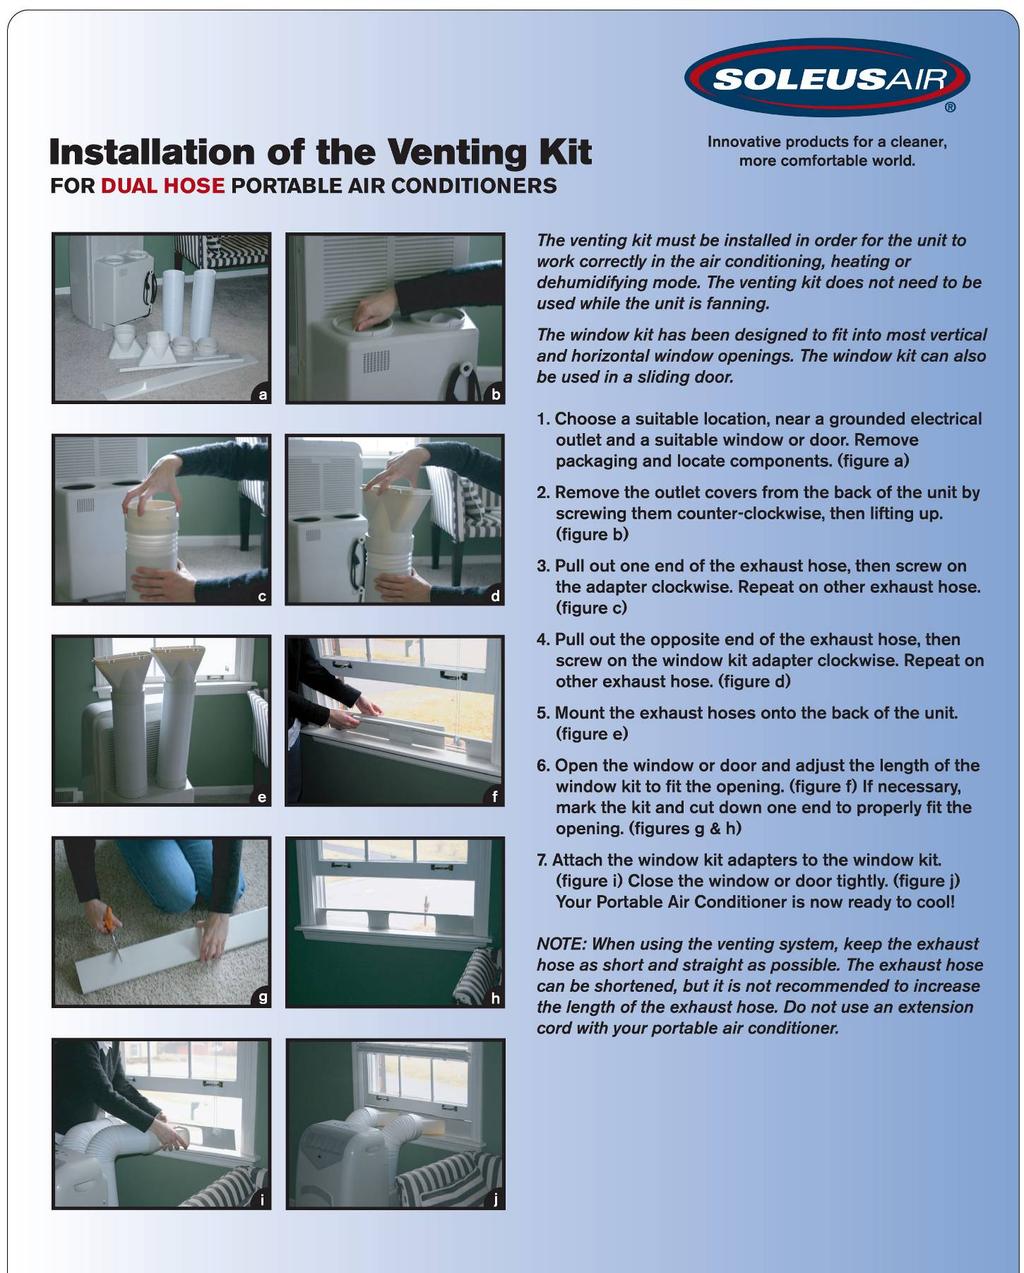 DUAL HOSE WINDOW KIT INSTALLATION - To quickly and efficiently cool a large area.